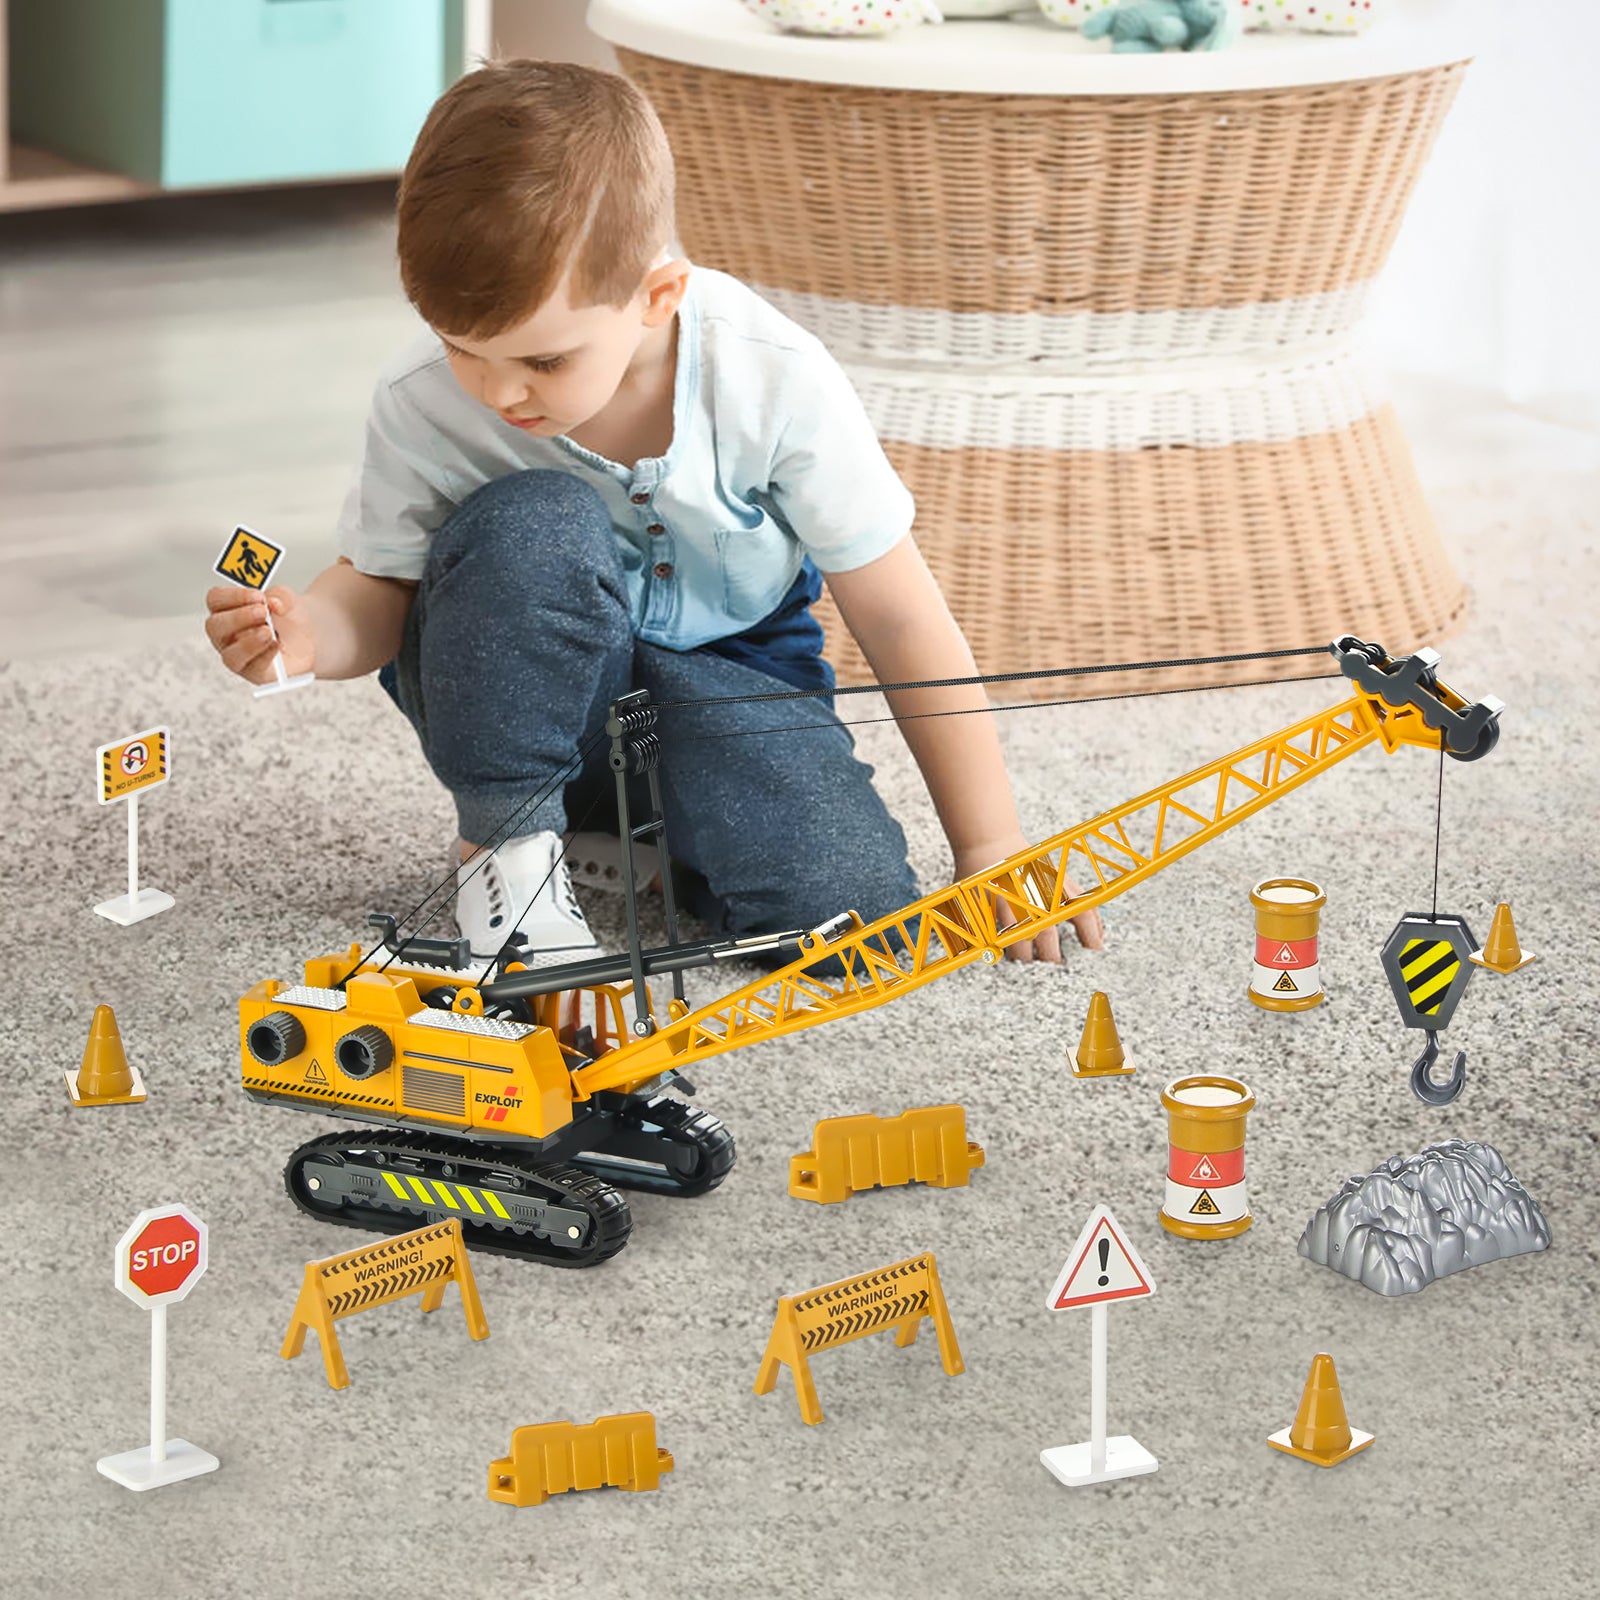  eMart Alloy Die-cast Model Toy Engineering Heavy Crane Truck  Vehicle Car Simulation Miniature 1:55 Kids Gift : Toys & Games